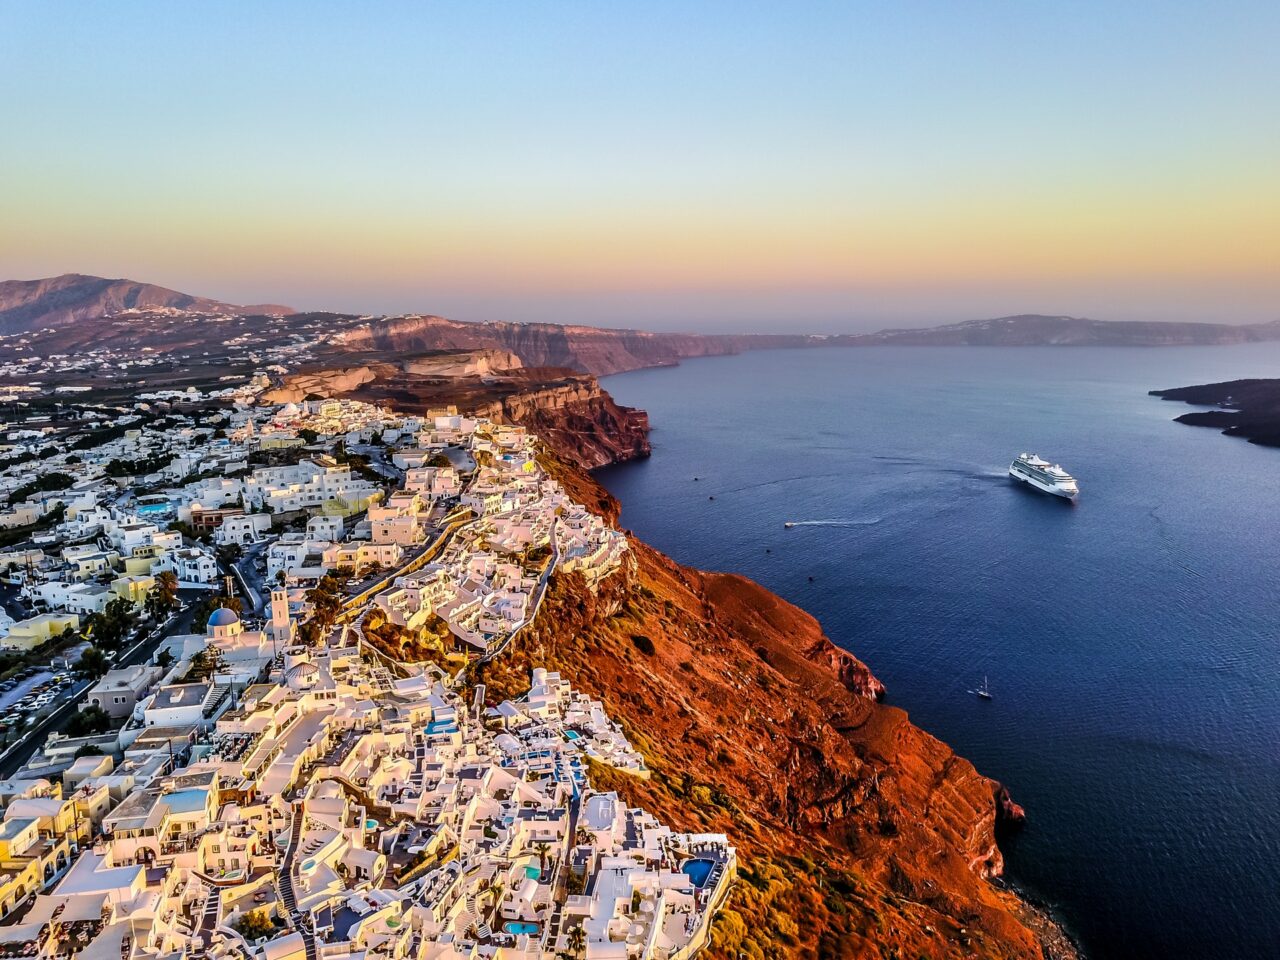 View of Santorini from above